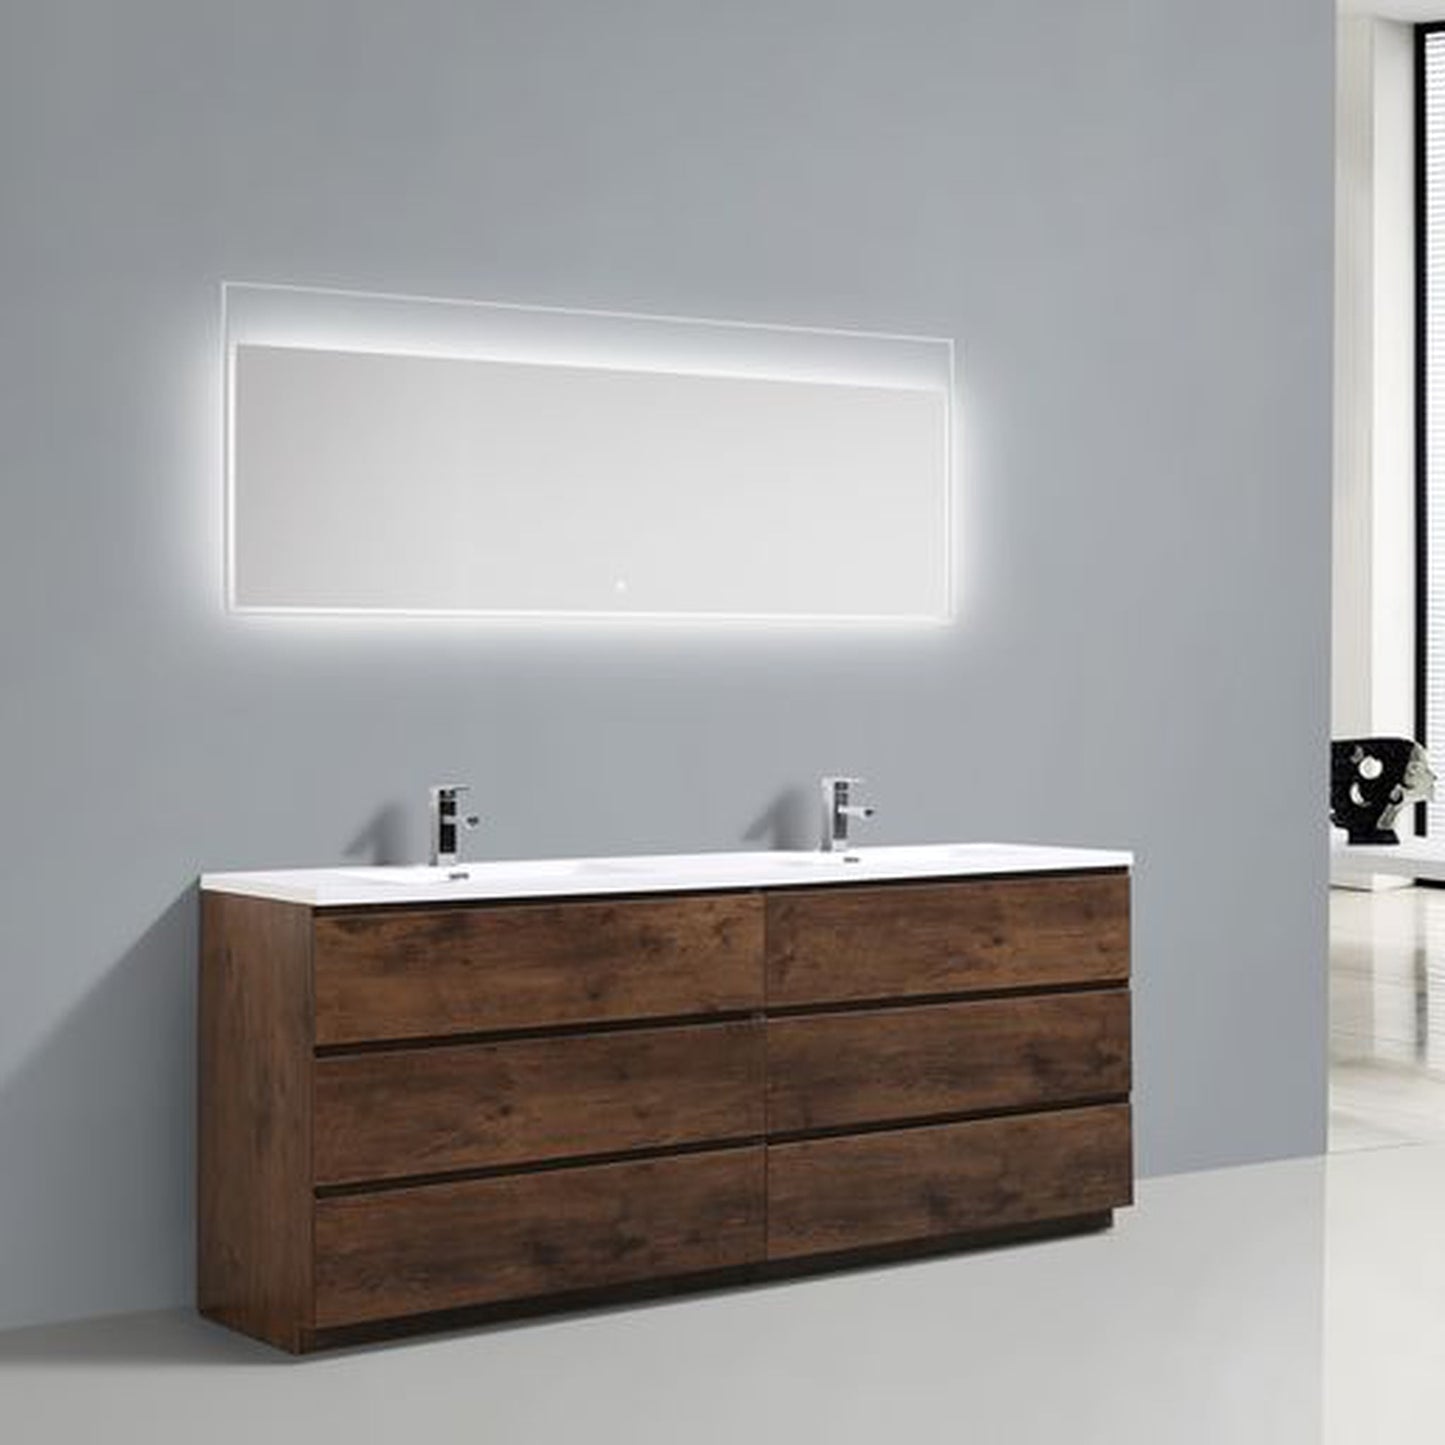 Moreno Bath Angeles 84" Rosewood Freestanding Vanity With Double Reinforced White Acrylic Sinks